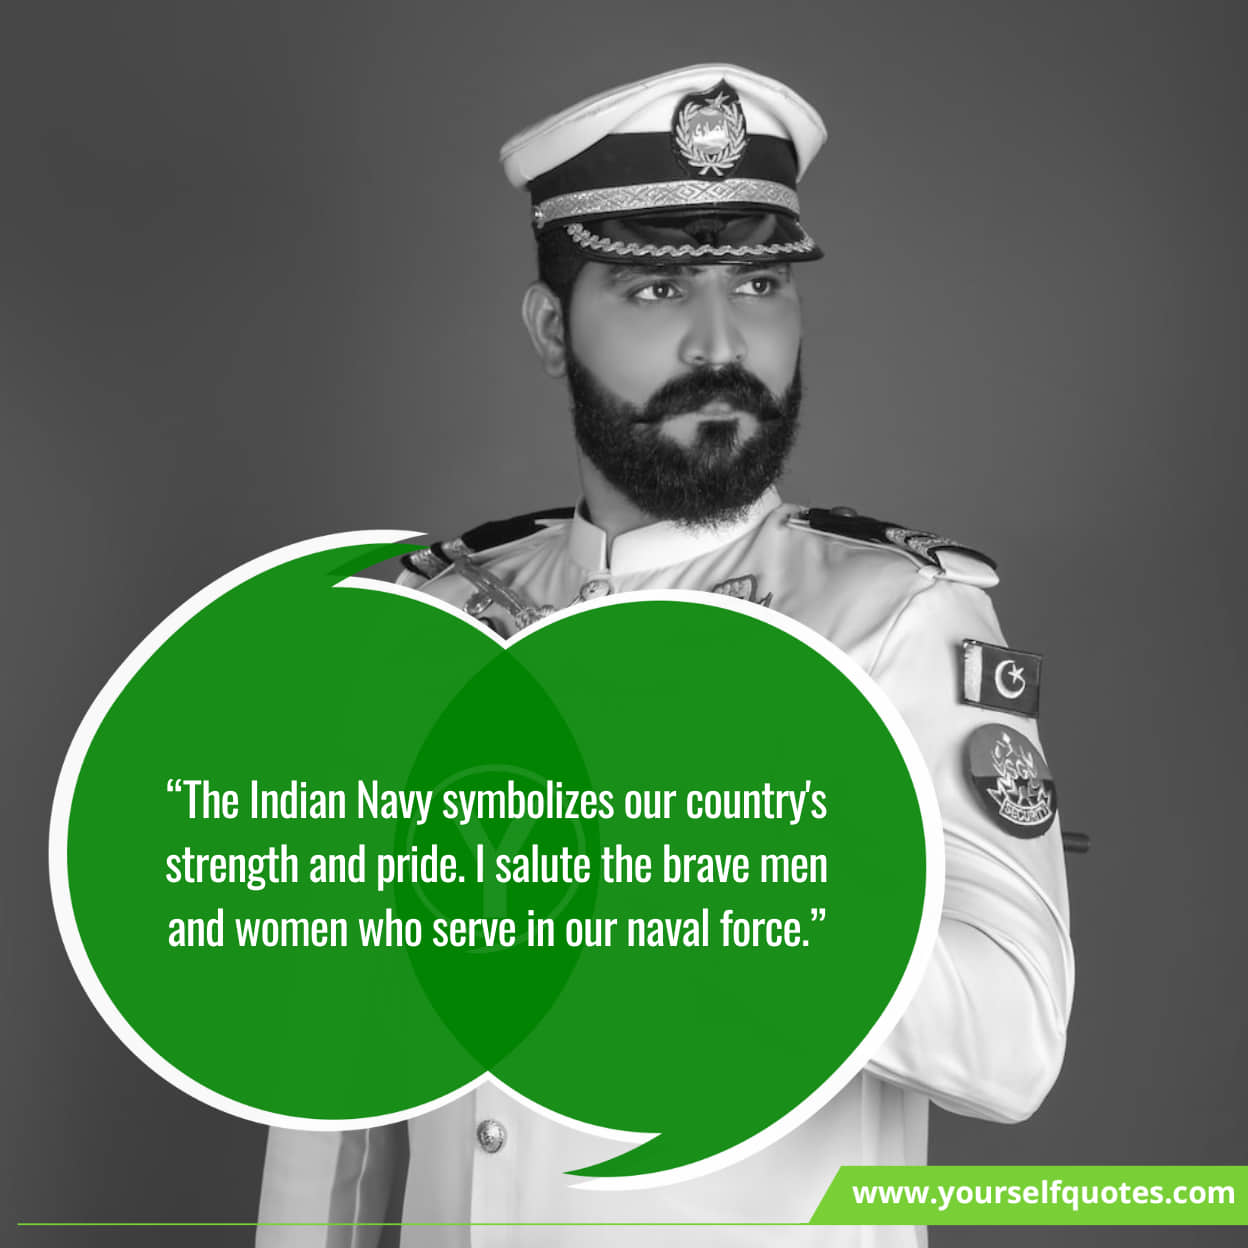 Quotes to honor the bravery of the Indian Navy